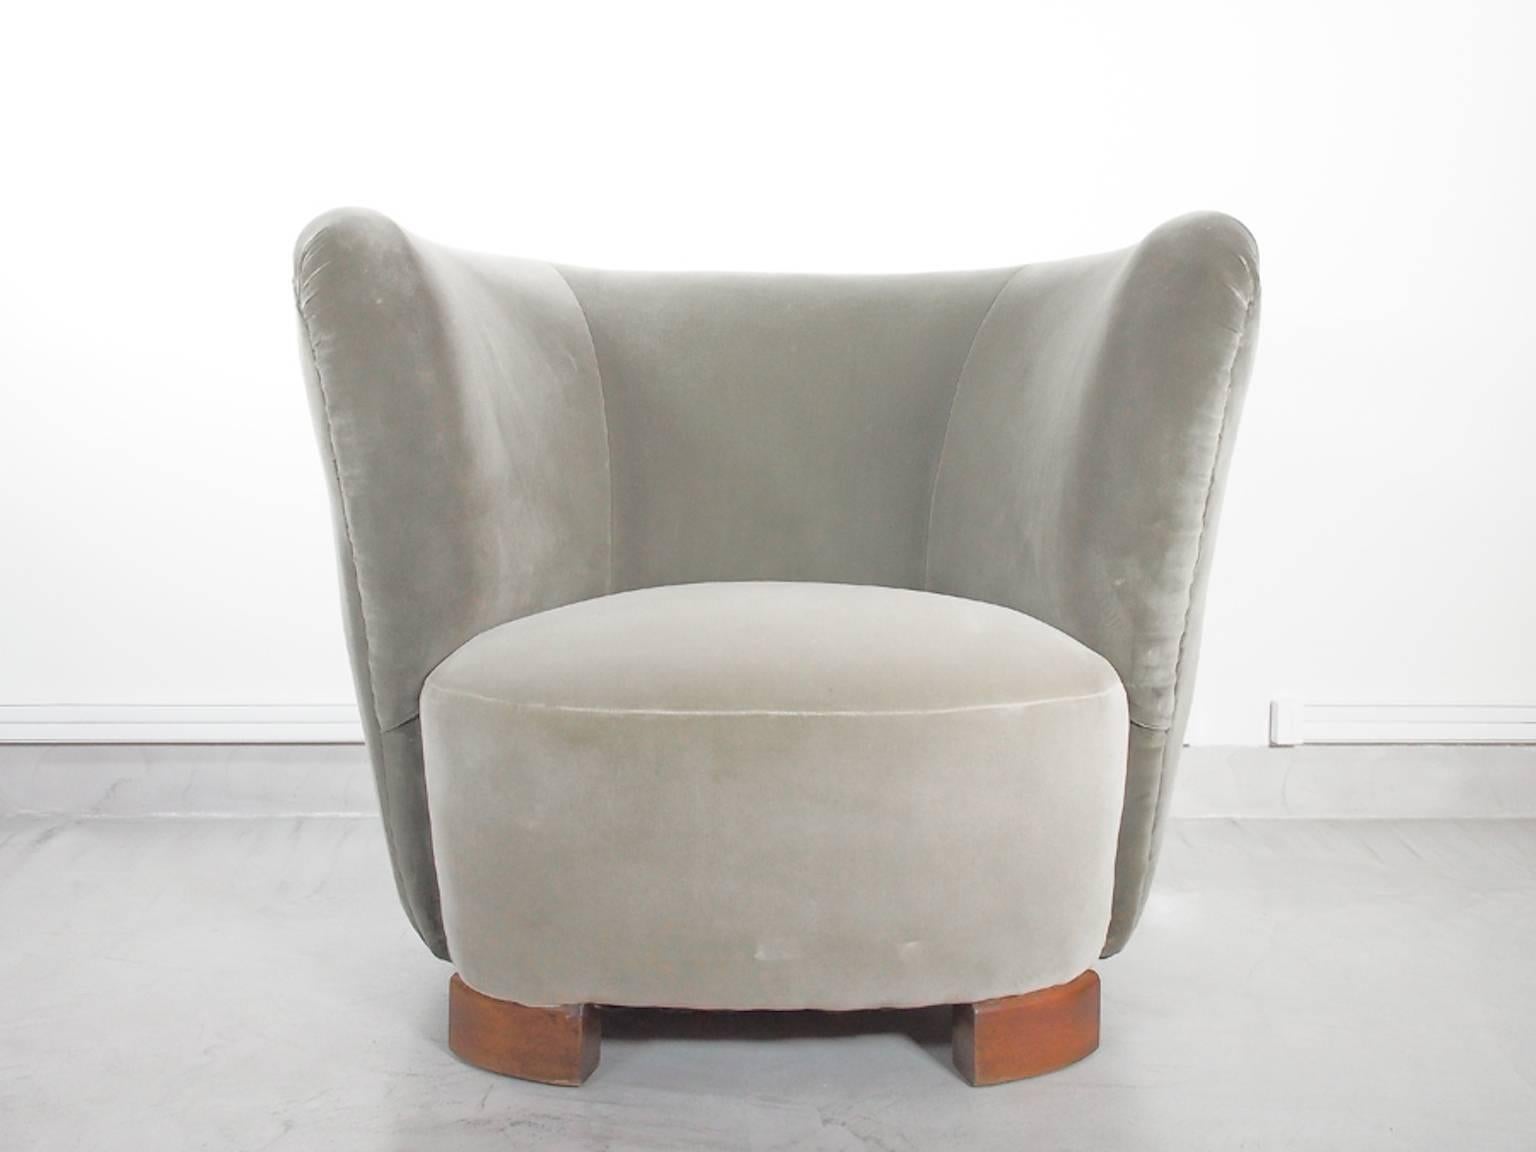 Beautiful velvet armchair in the style of Art Deco. Presumably Danish. Reupholstered in two different shades of grey velvet. Seat with springs, stained beech legs. Excellent condition.